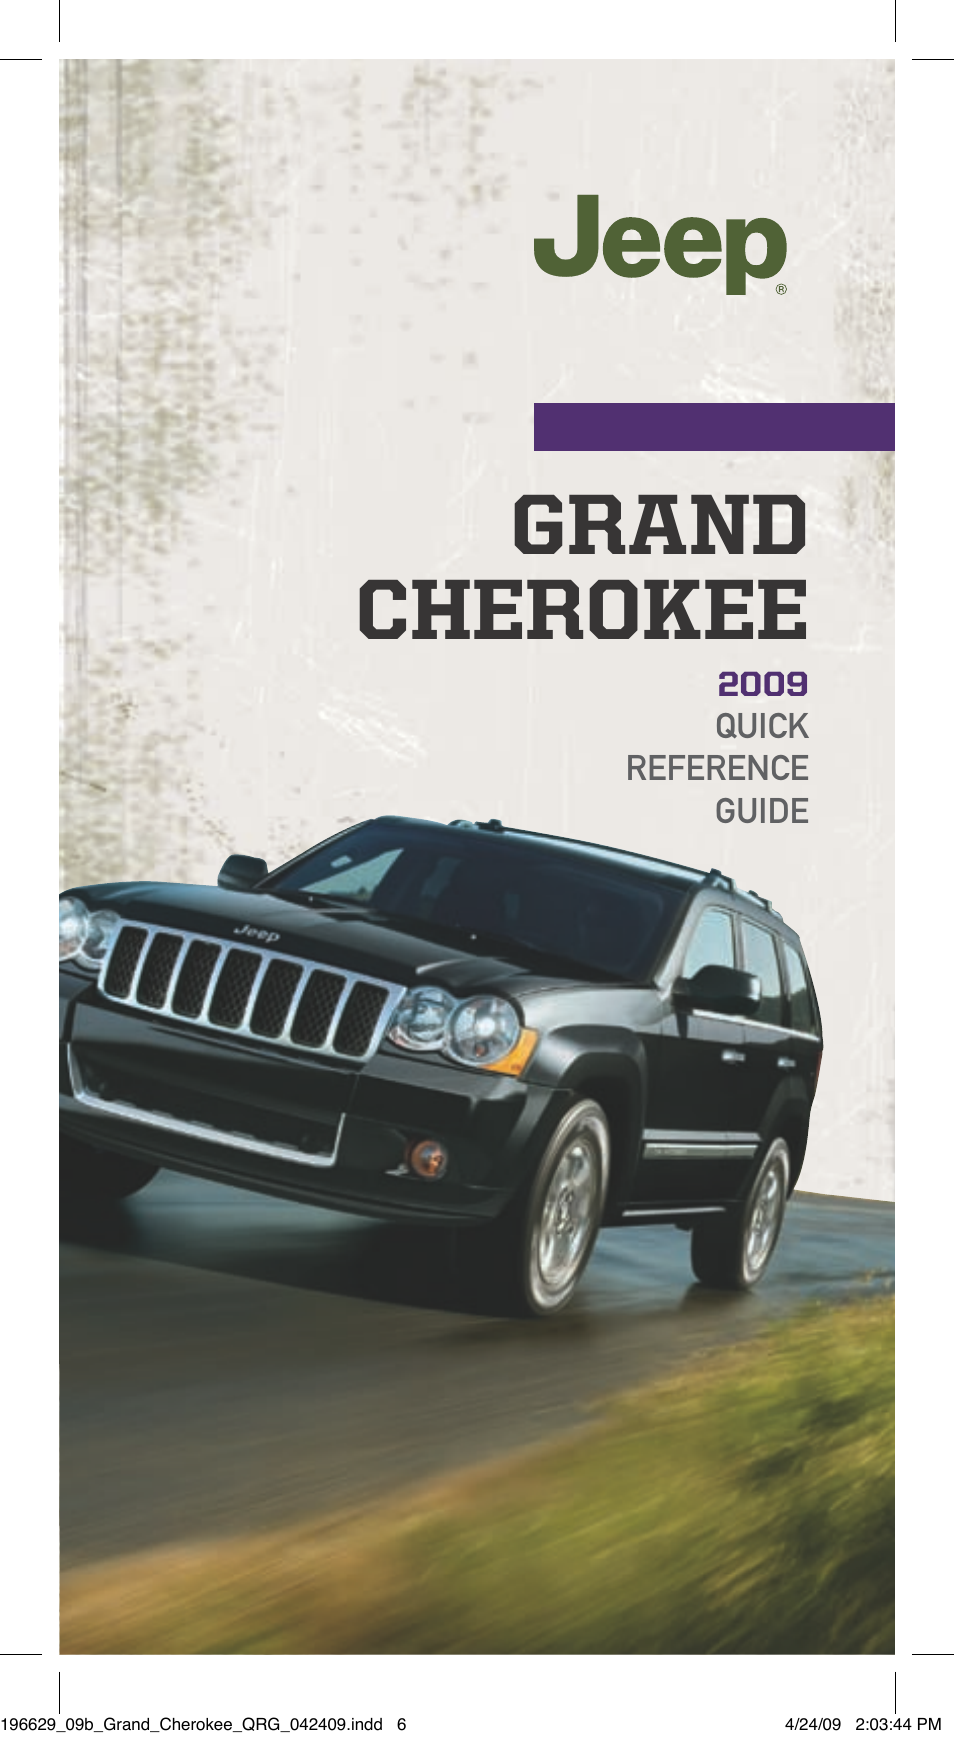 2009 Grand Cherokee - Quick Reference Guide